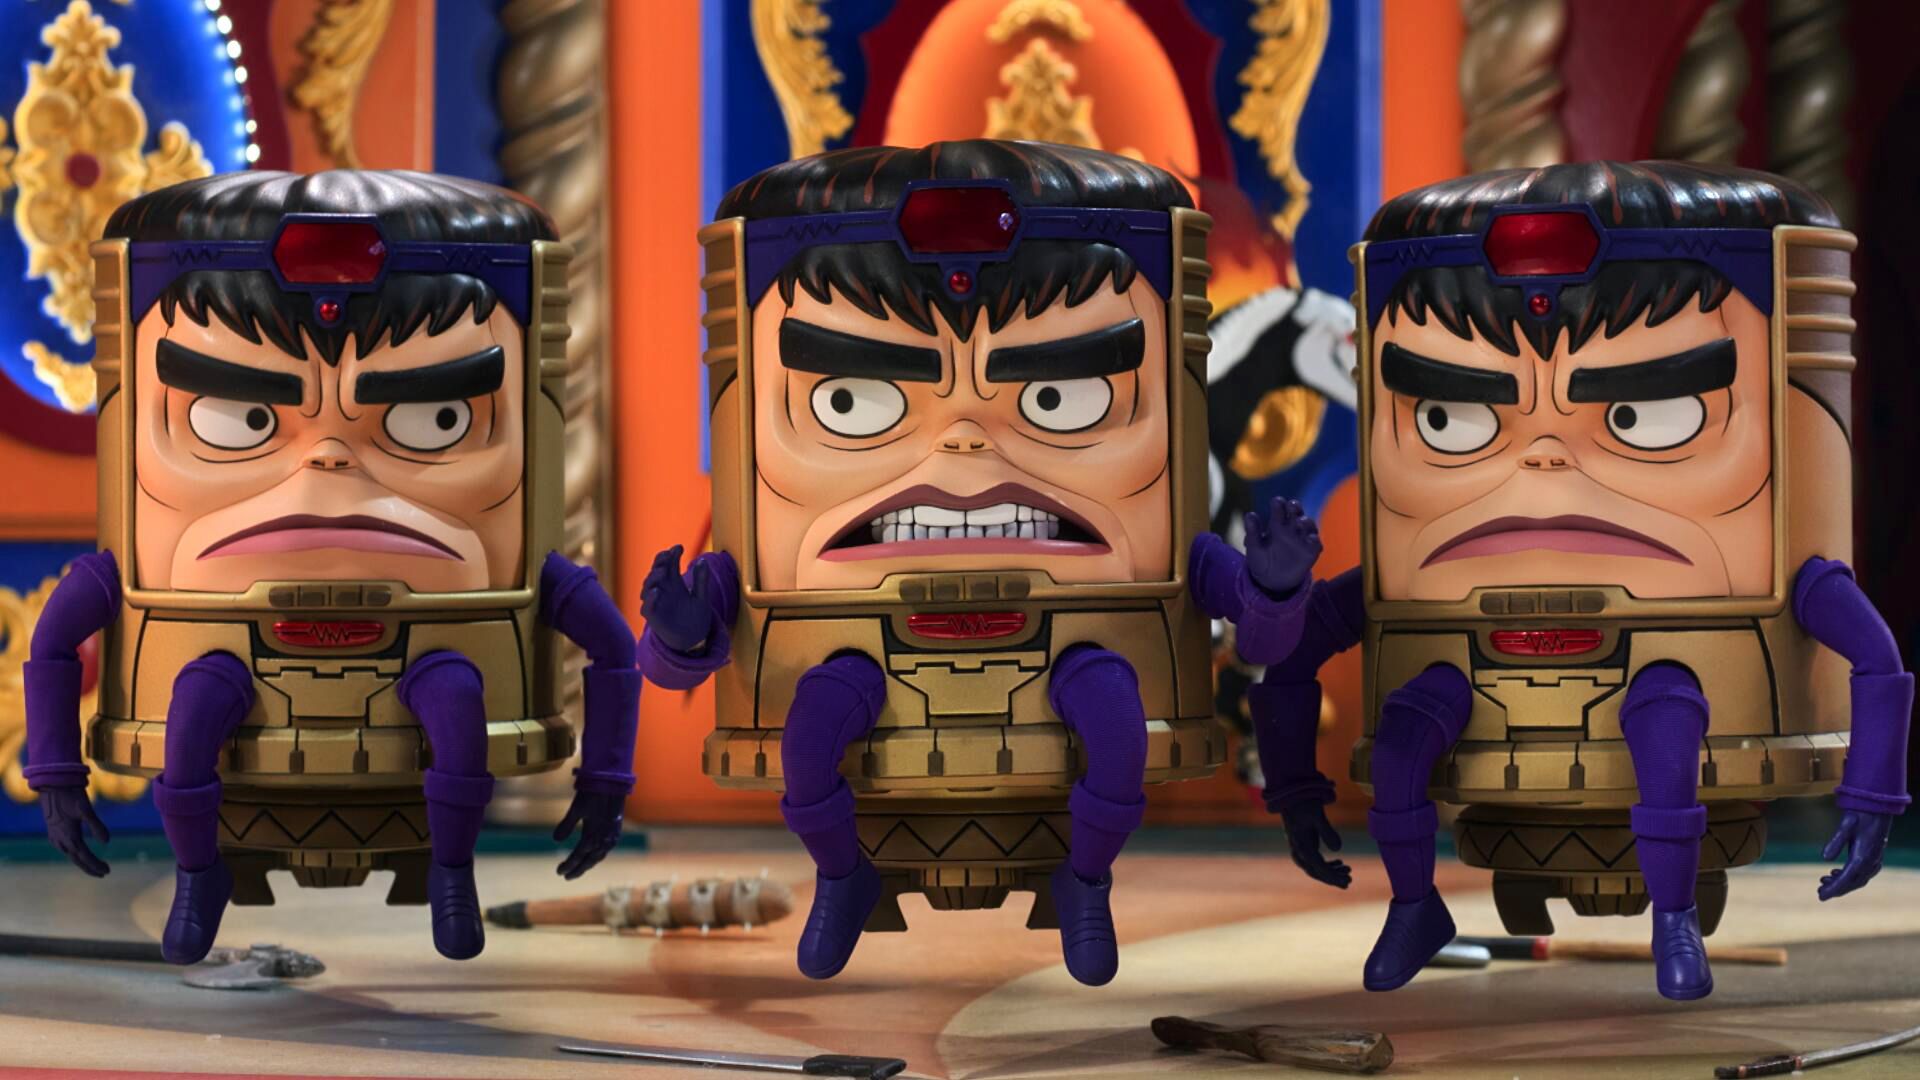 Hulu's 'Marvel's M.O.D.O.K.' gives one of the company's weird offshoots its time to shine